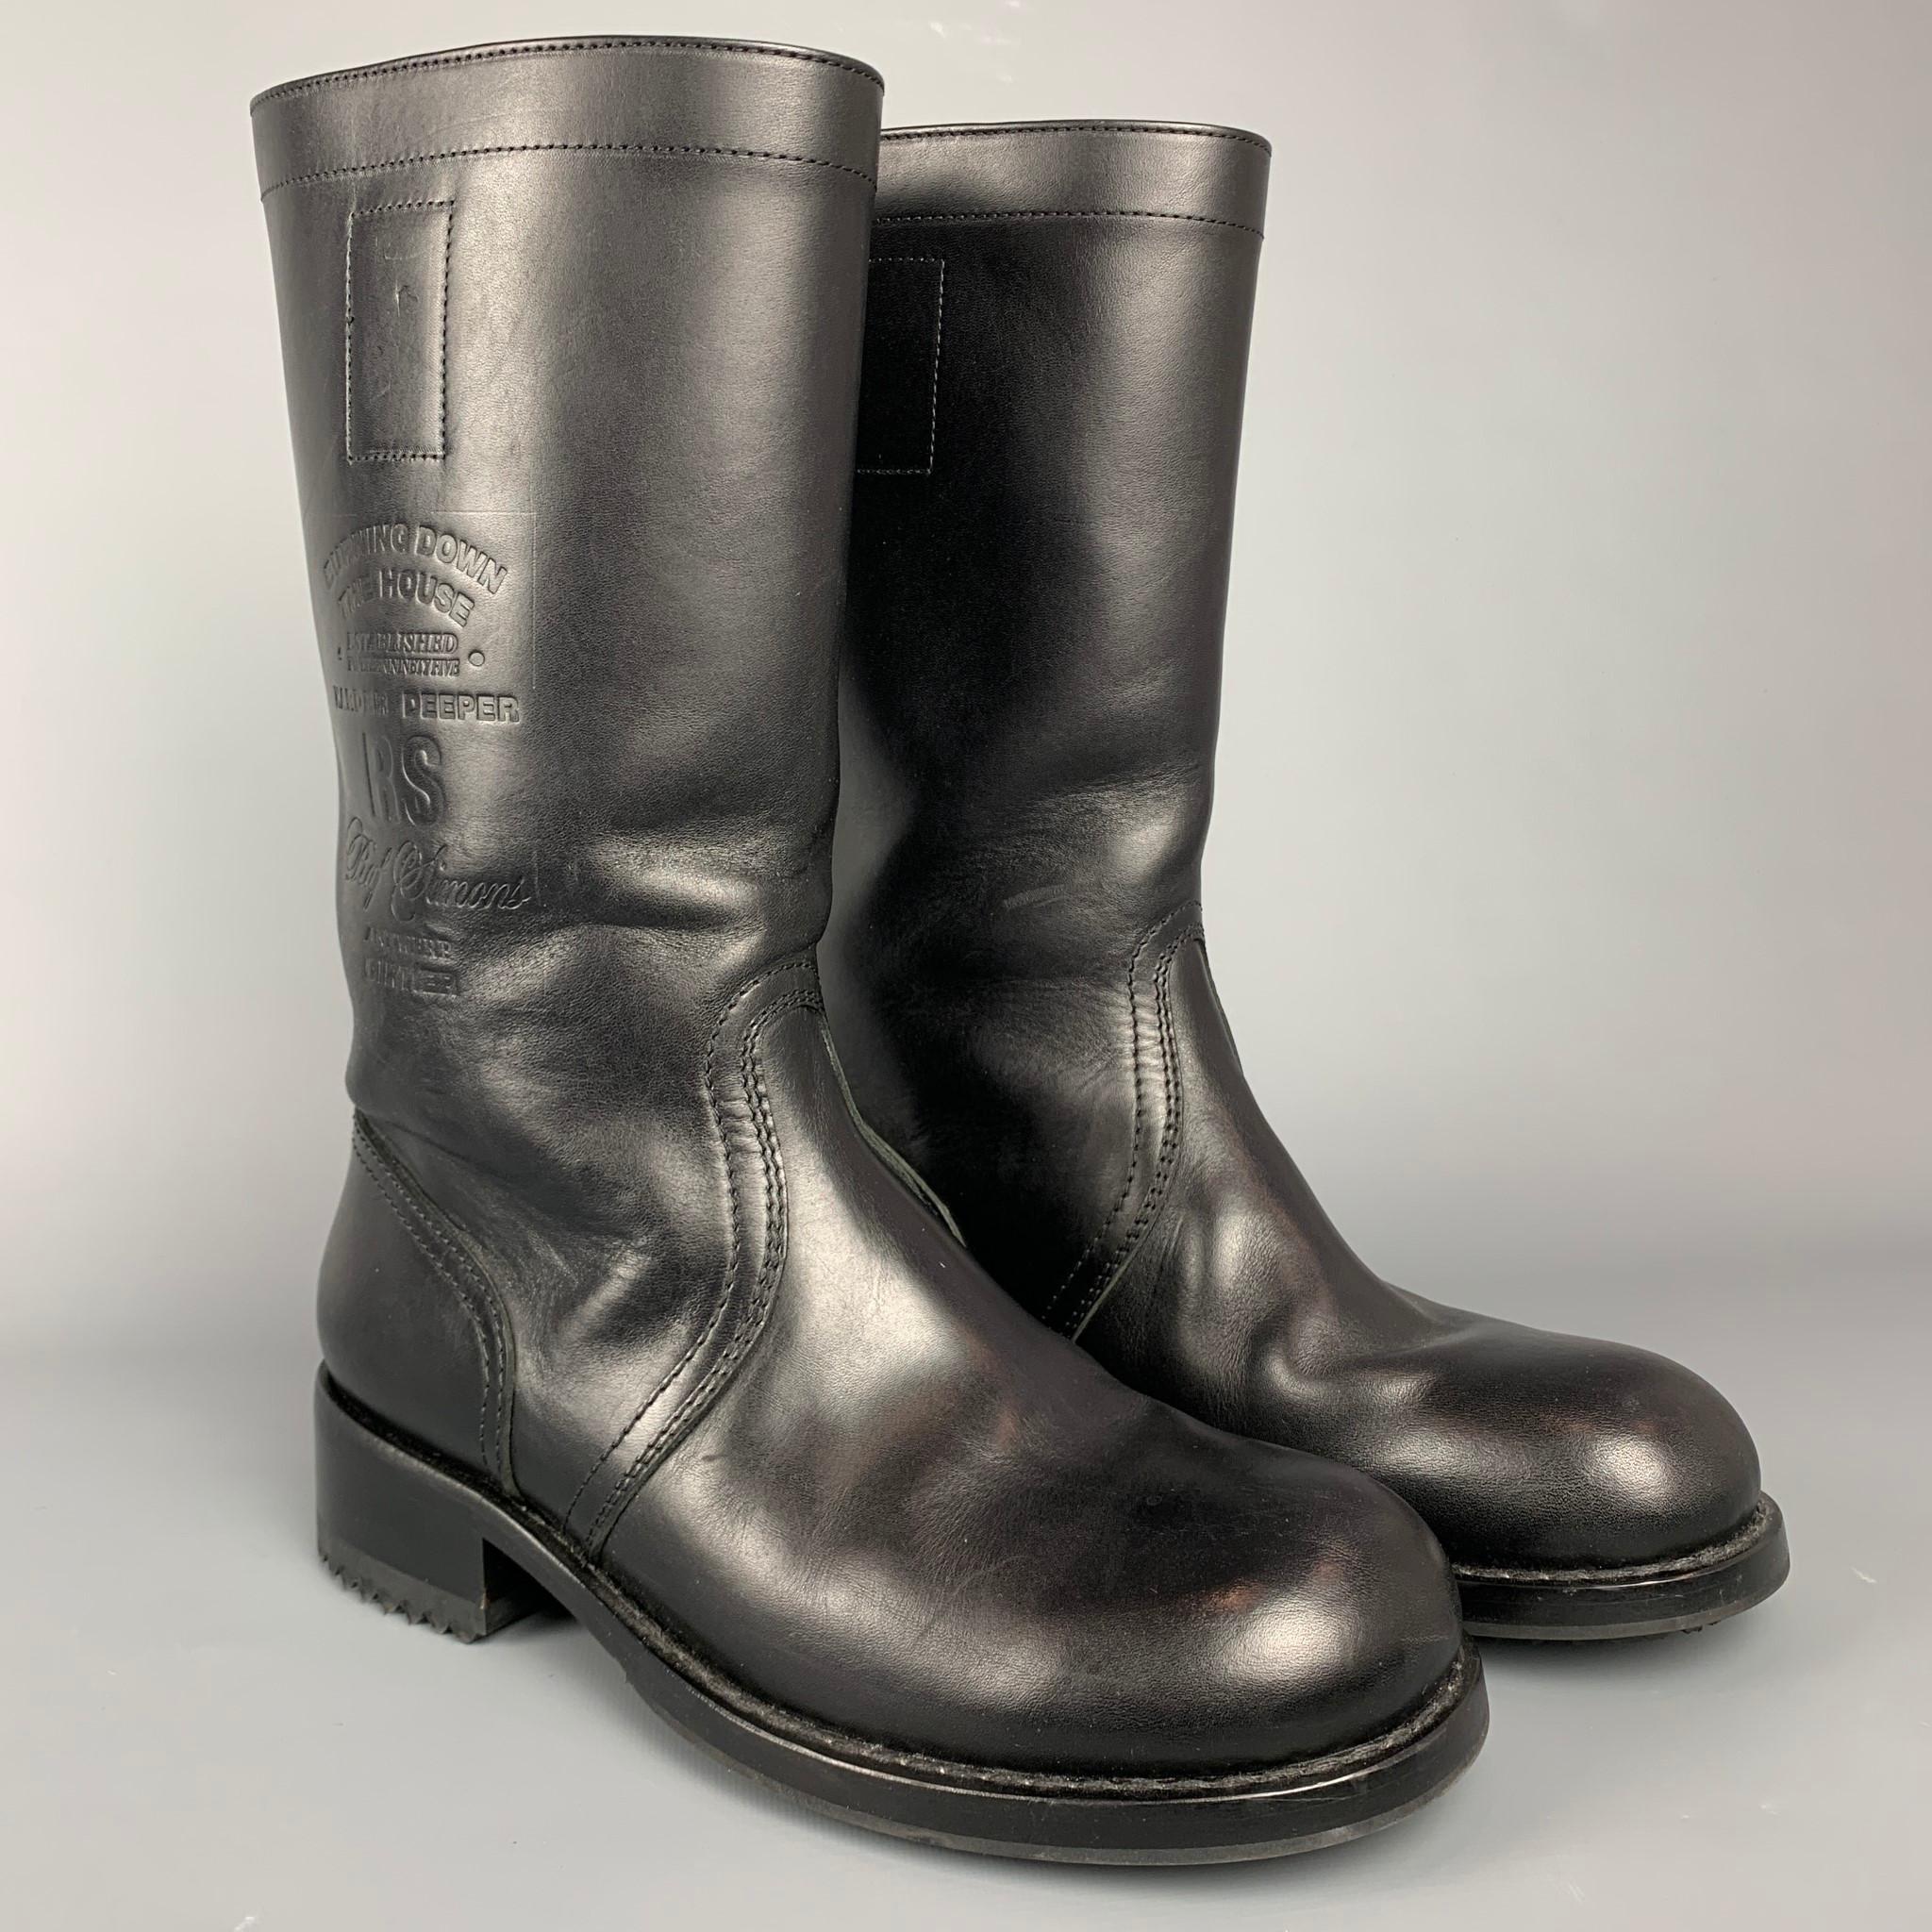 RAF SIMONS A/W 19 boots comes in a black leather featuring a round toe, pull on style, top stitching, debossed logos on the side 'Burning Down The House' and a serrated rubber sole. Made in Italy.

Very Good Pre-Owned Condition.
Marked: EU